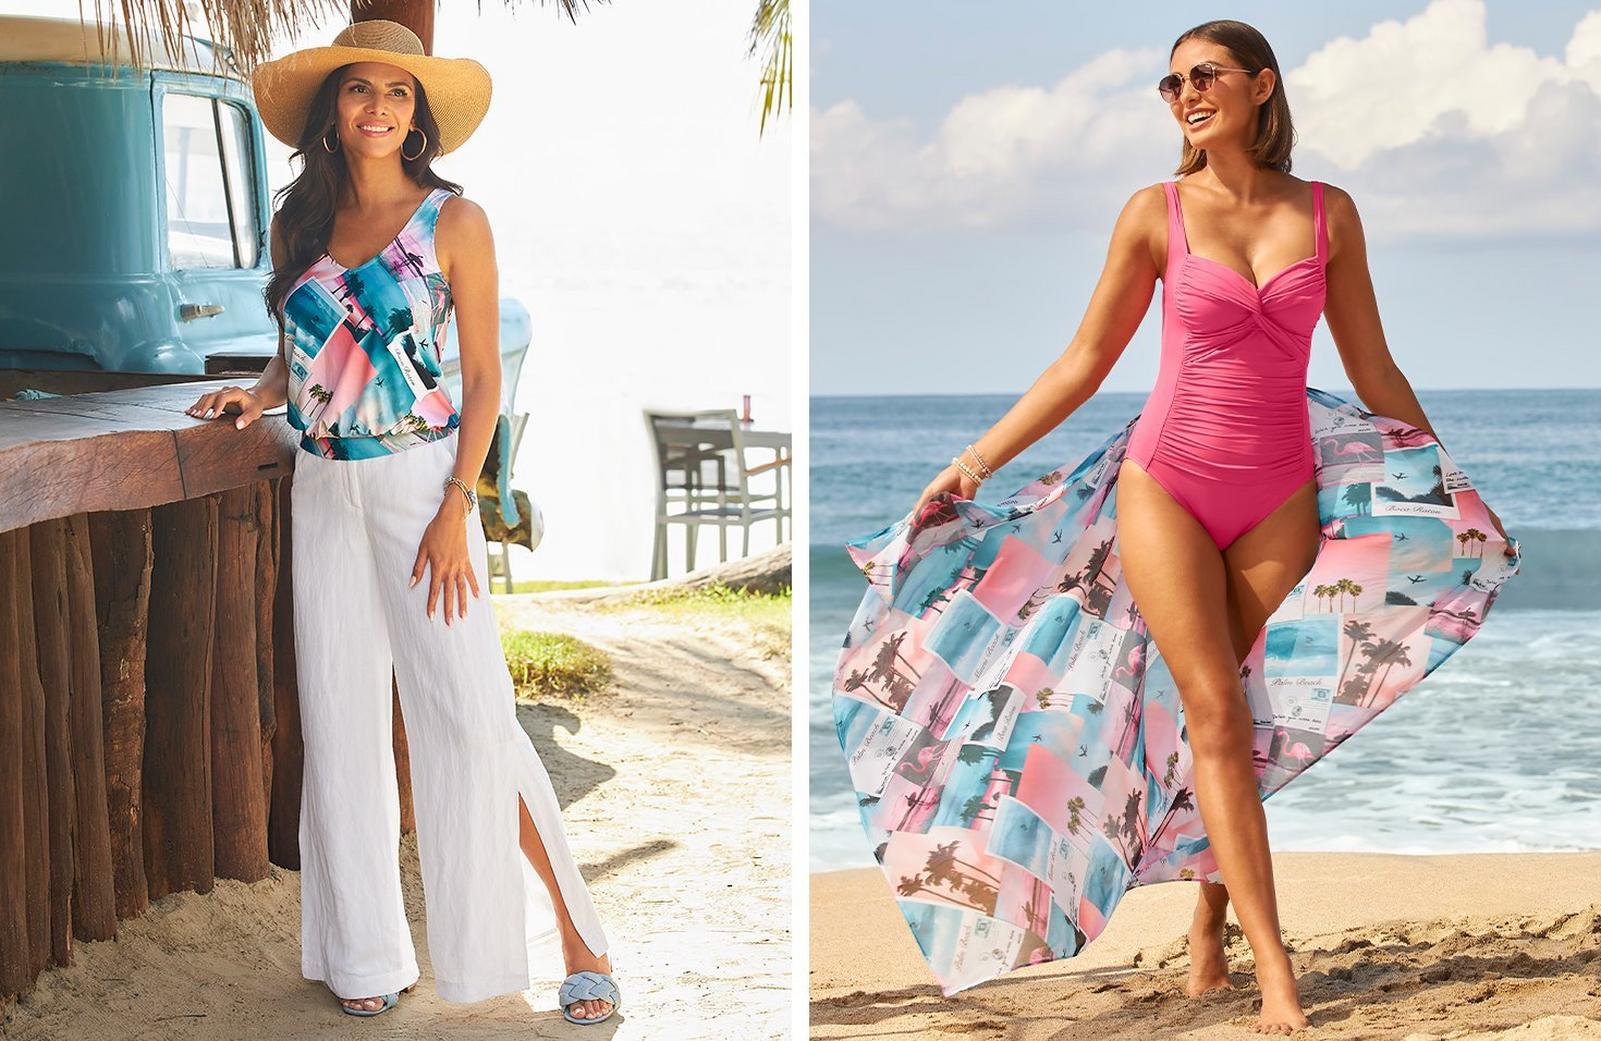 left model wearing a postcard print sleeveless blouson top, cowboy hat, white side slit linen pants, and blue braided sandals. right model wearing a pink one-piece swimsuit, postcard print pareo, and sunglasses.